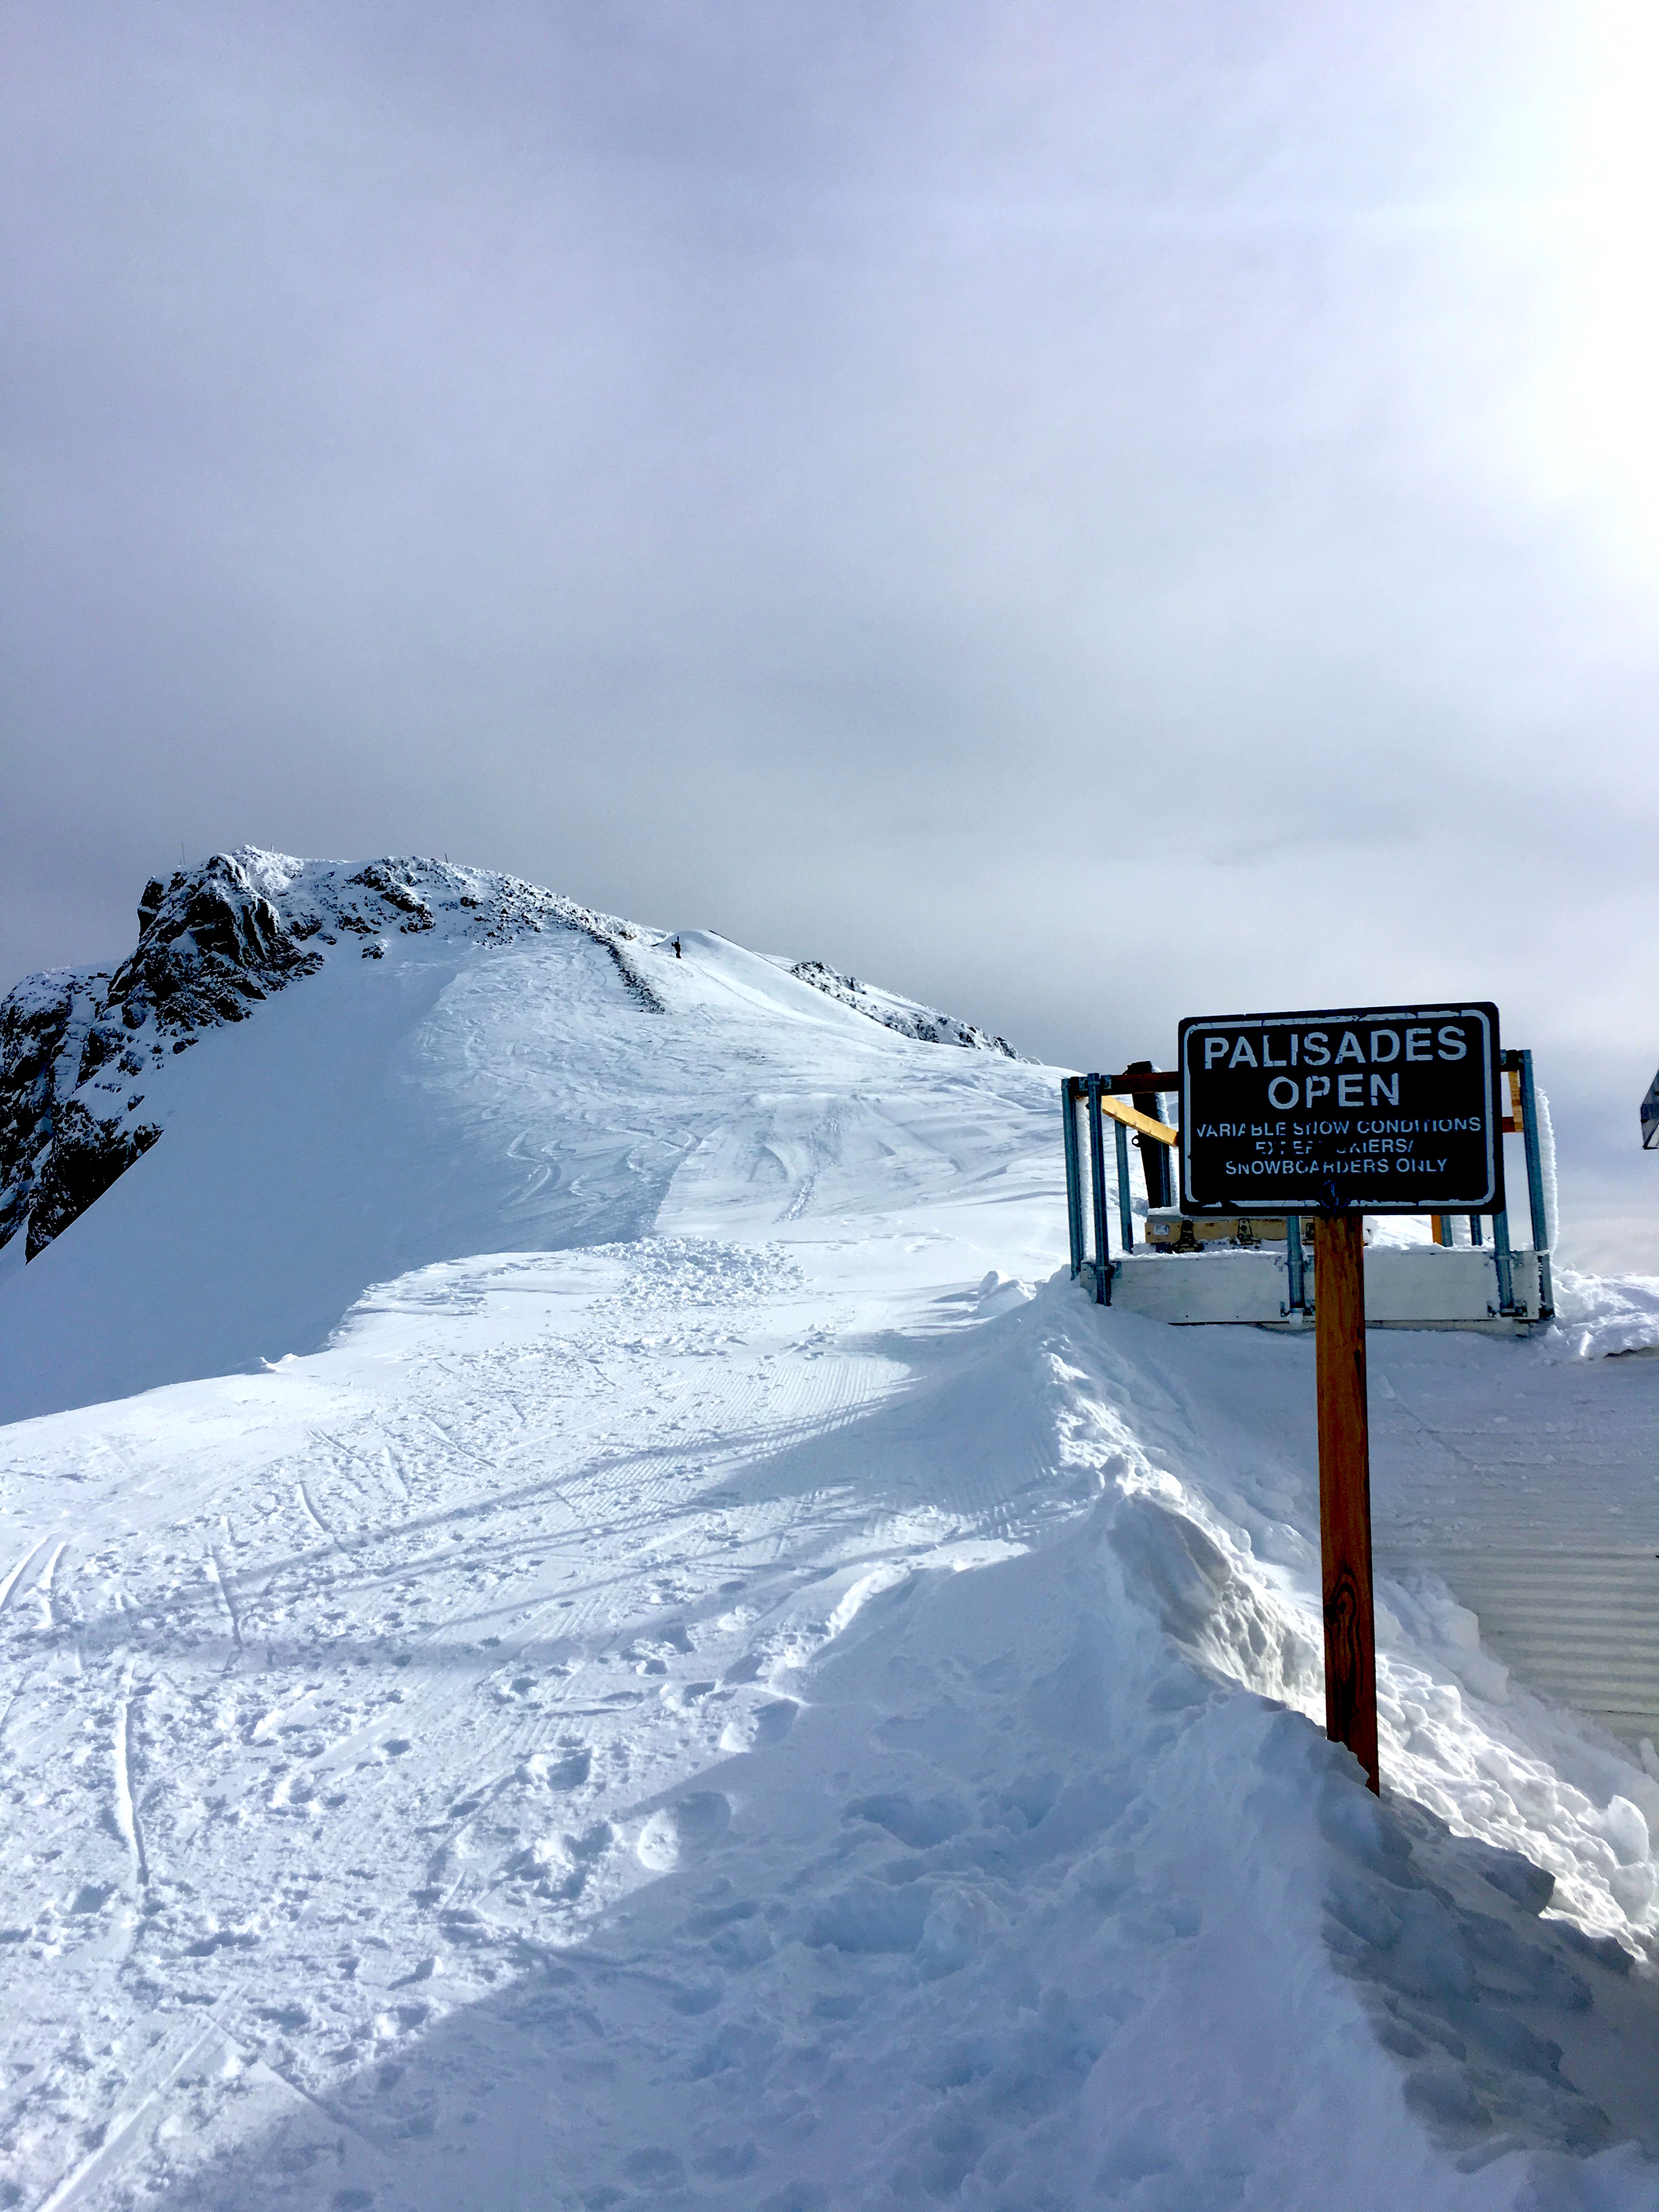 Palisade have been open. photo: snowbrains